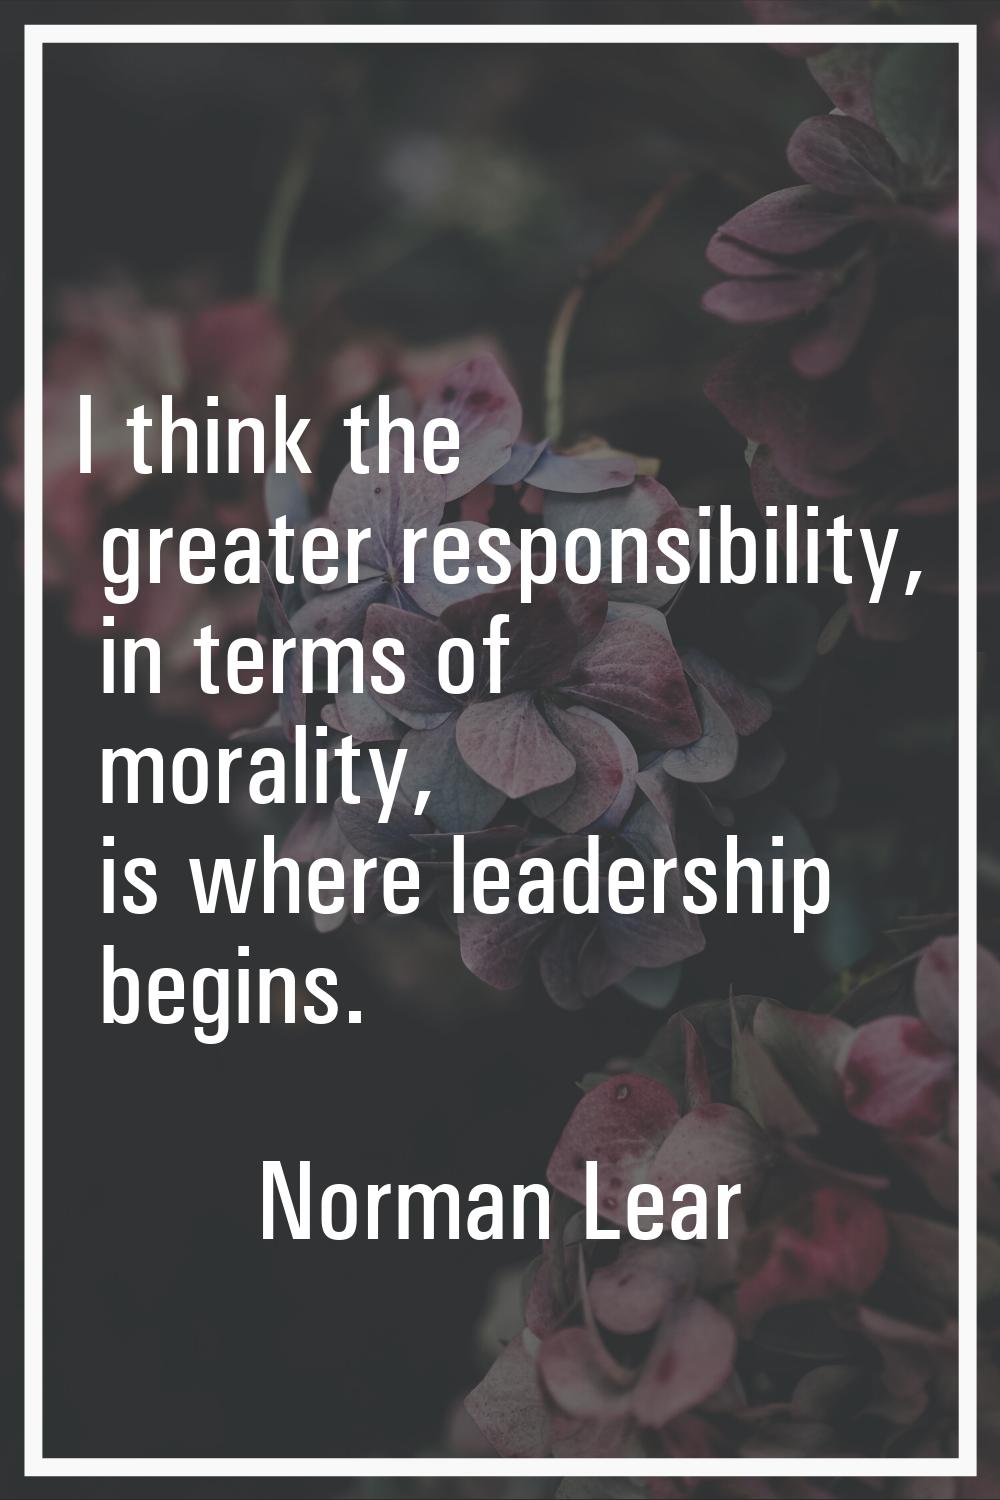 I think the greater responsibility, in terms of morality, is where leadership begins.